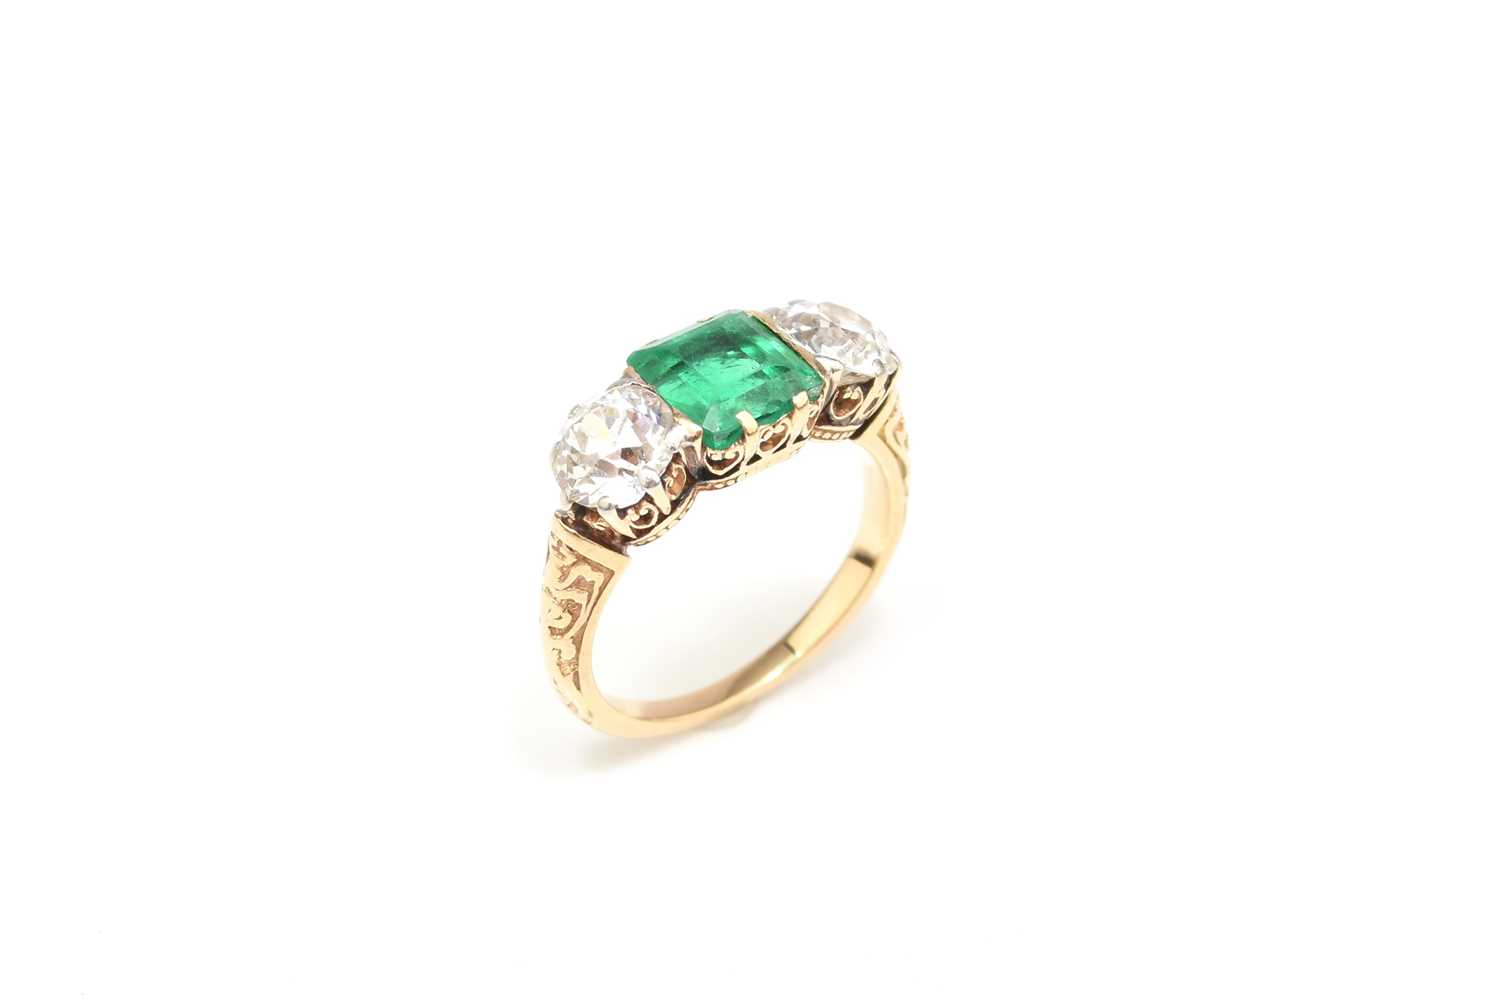 37 - A late 19th / early 20th century three stone emerald and diamond ring